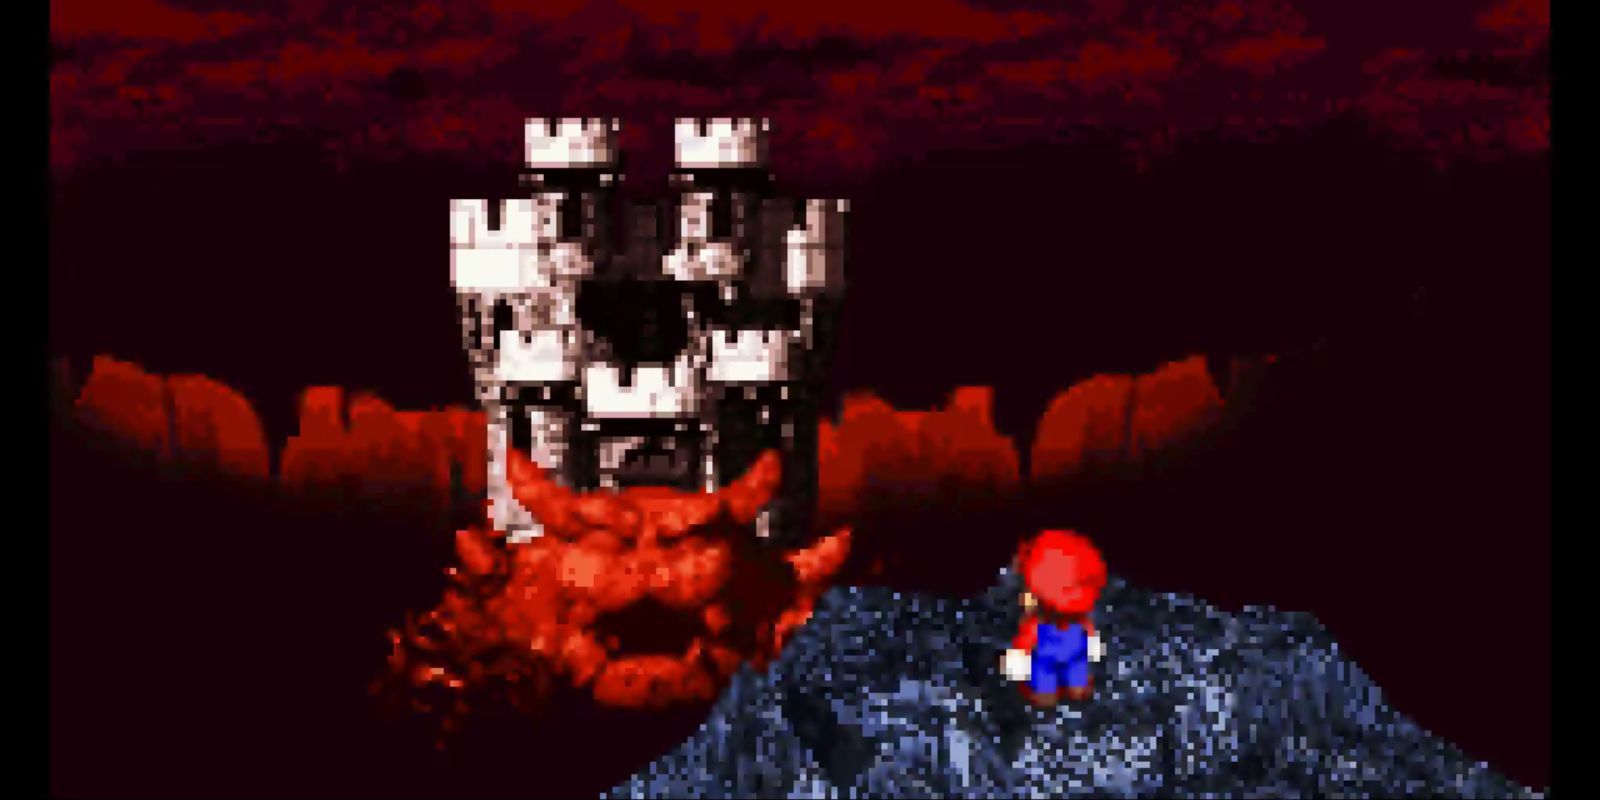 Super Mario RPG Screenshot Of Mario Looking At Bowsers Castle In The Distance